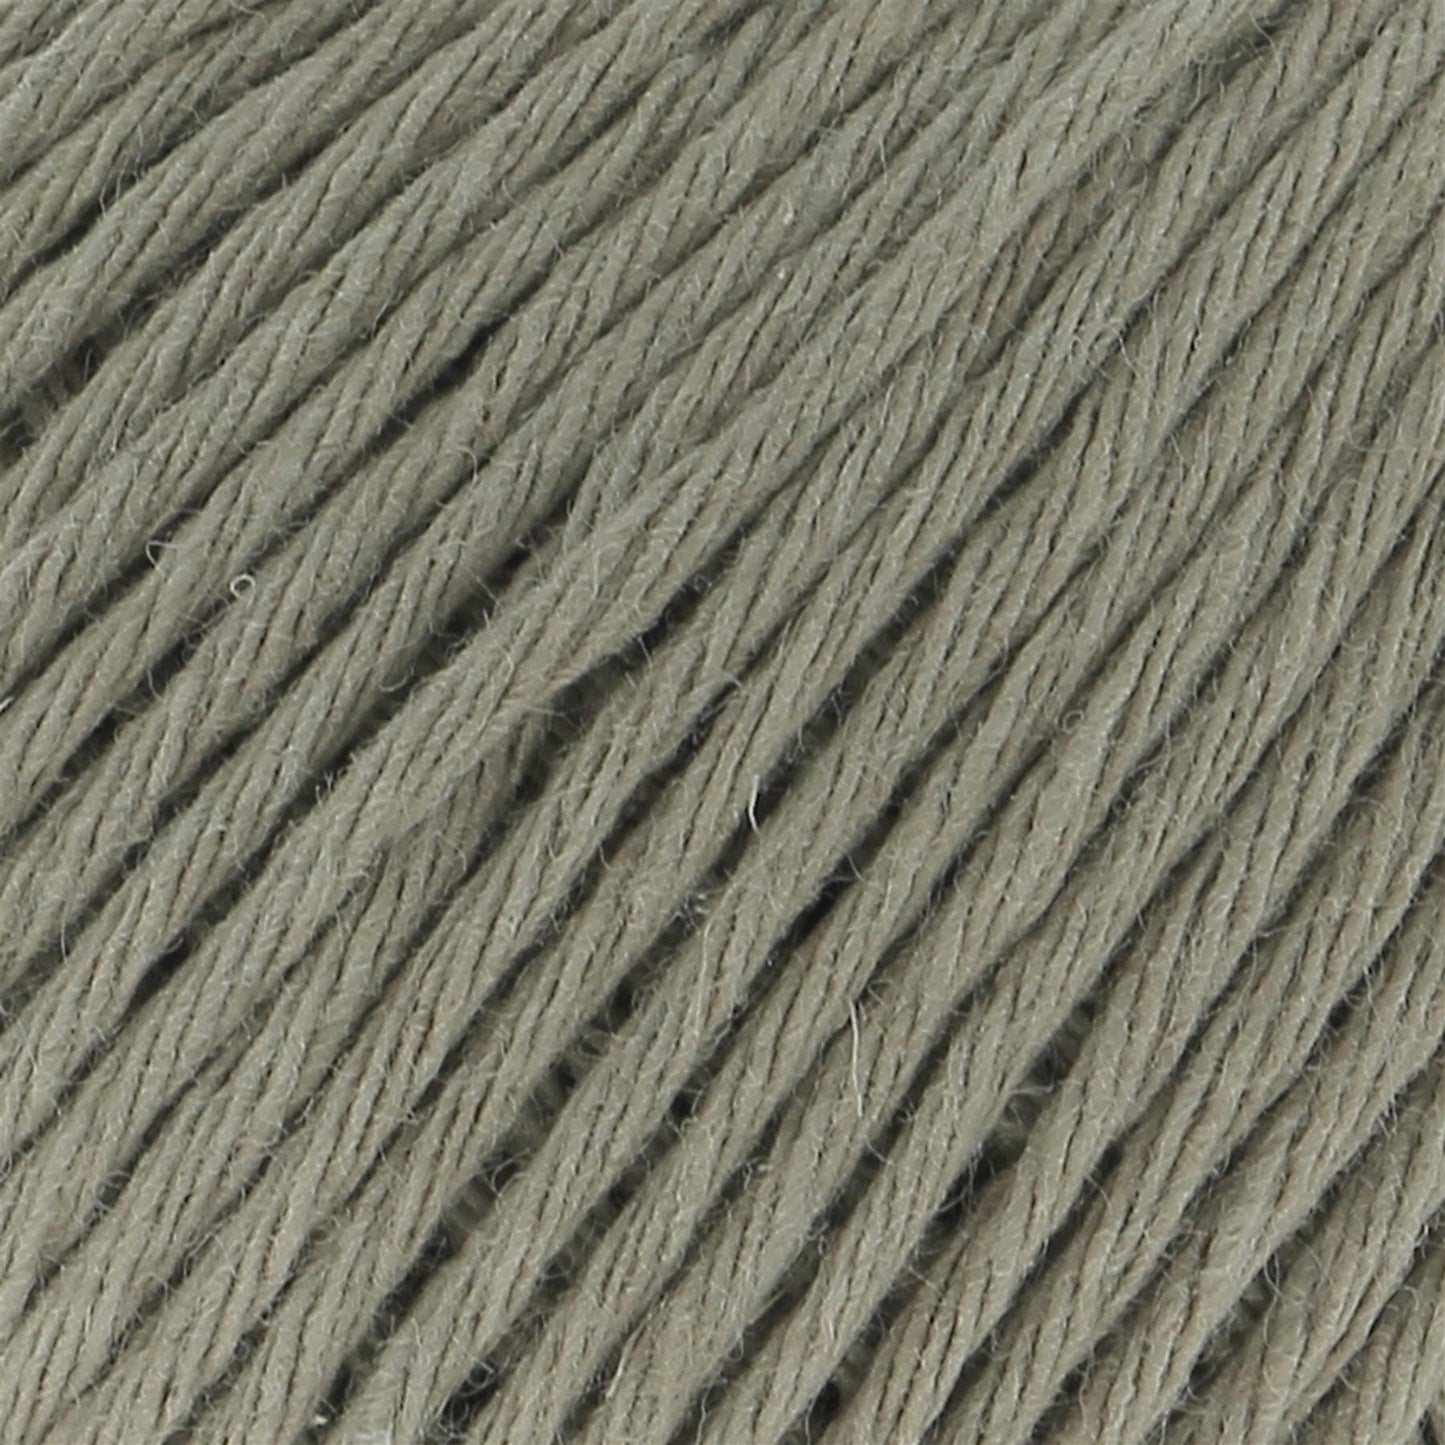 [Hoooked] SO1250G Somen Taupe Brown Cotton/Linen Blend Yarn - 82.5M, 50g